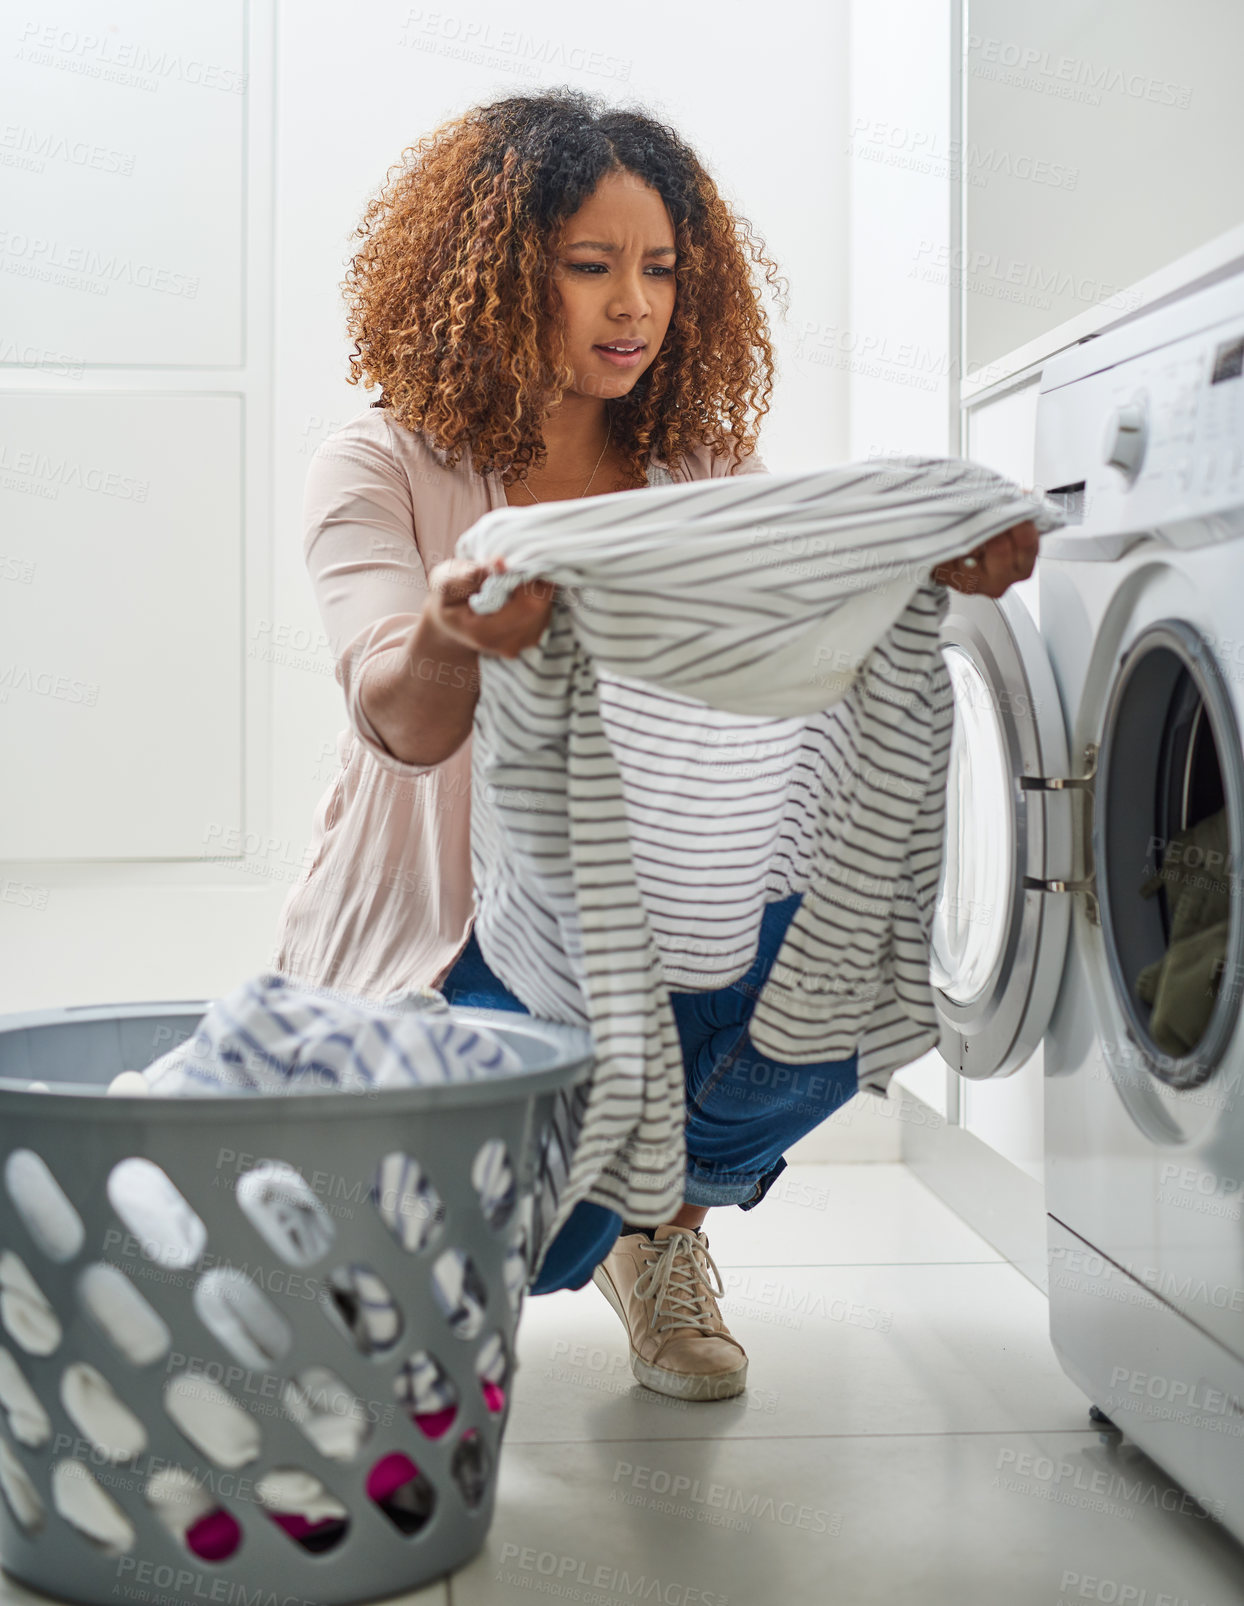 Buy stock photo Shot of a young attractive woman doing laundry at home